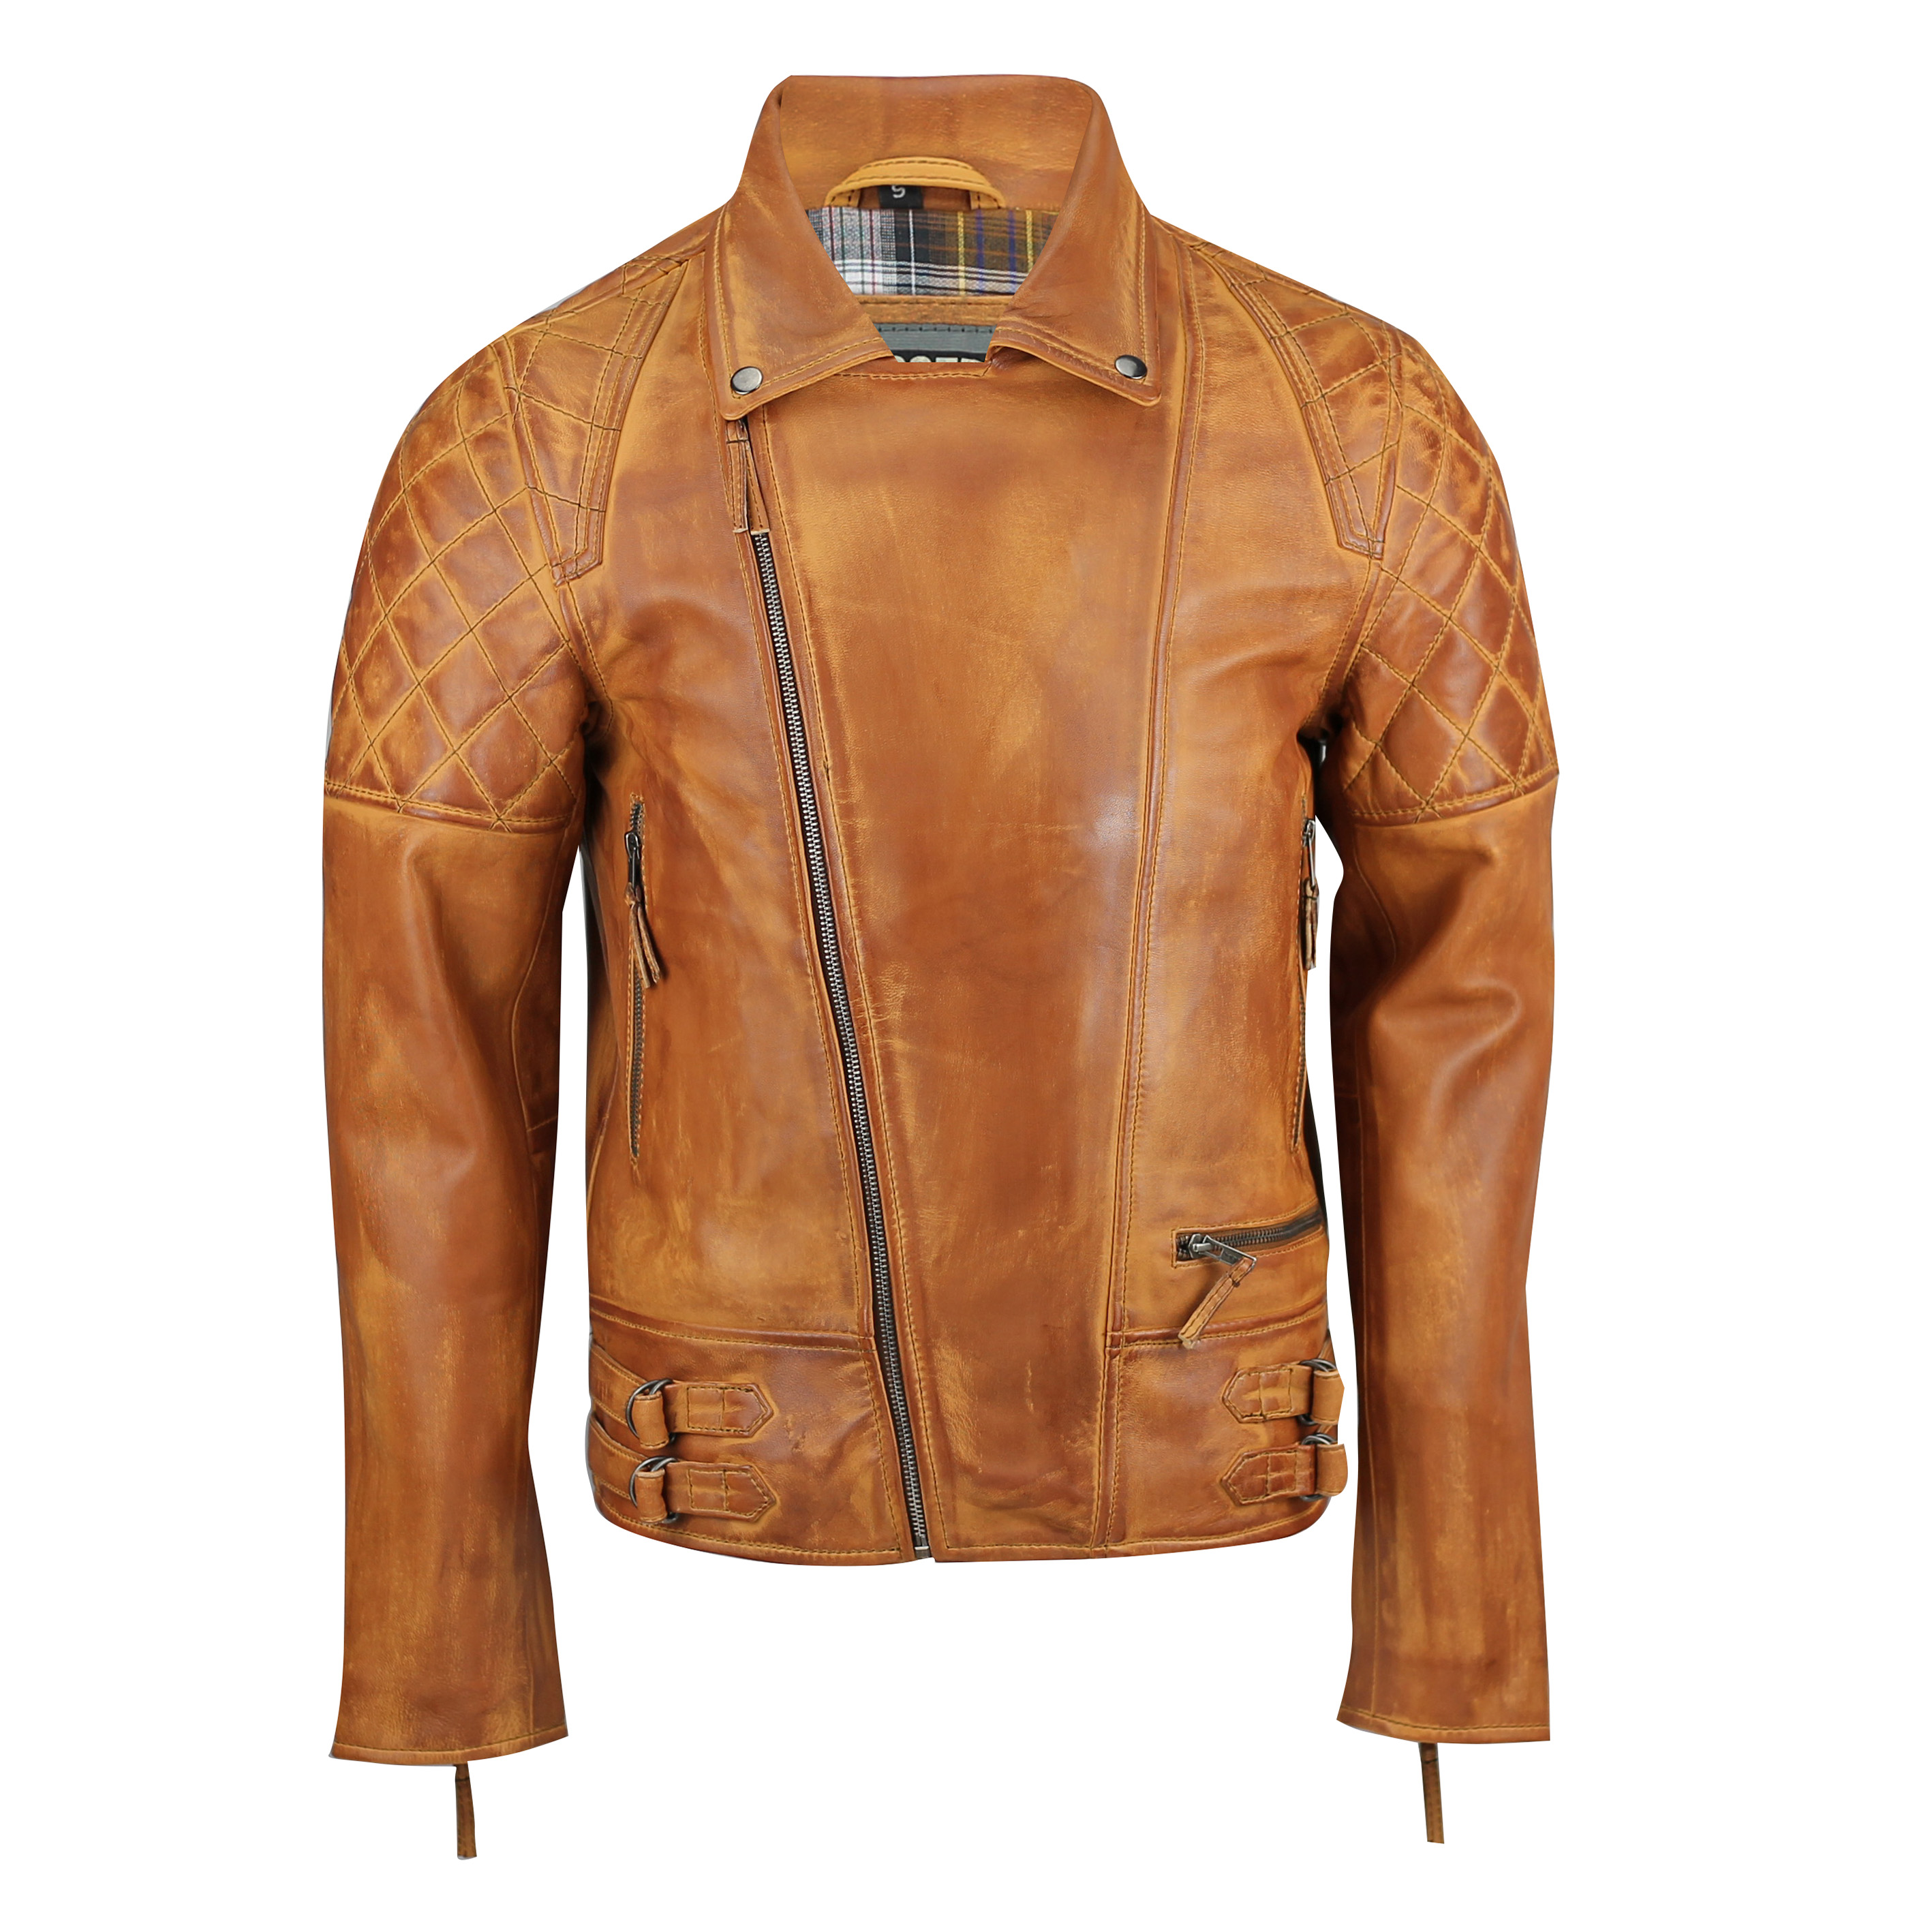 Xposed New Ladies Women’s Soft Real Leather Vintage Fitted Tan Brown Biker Style Jacket Size S 5XL 